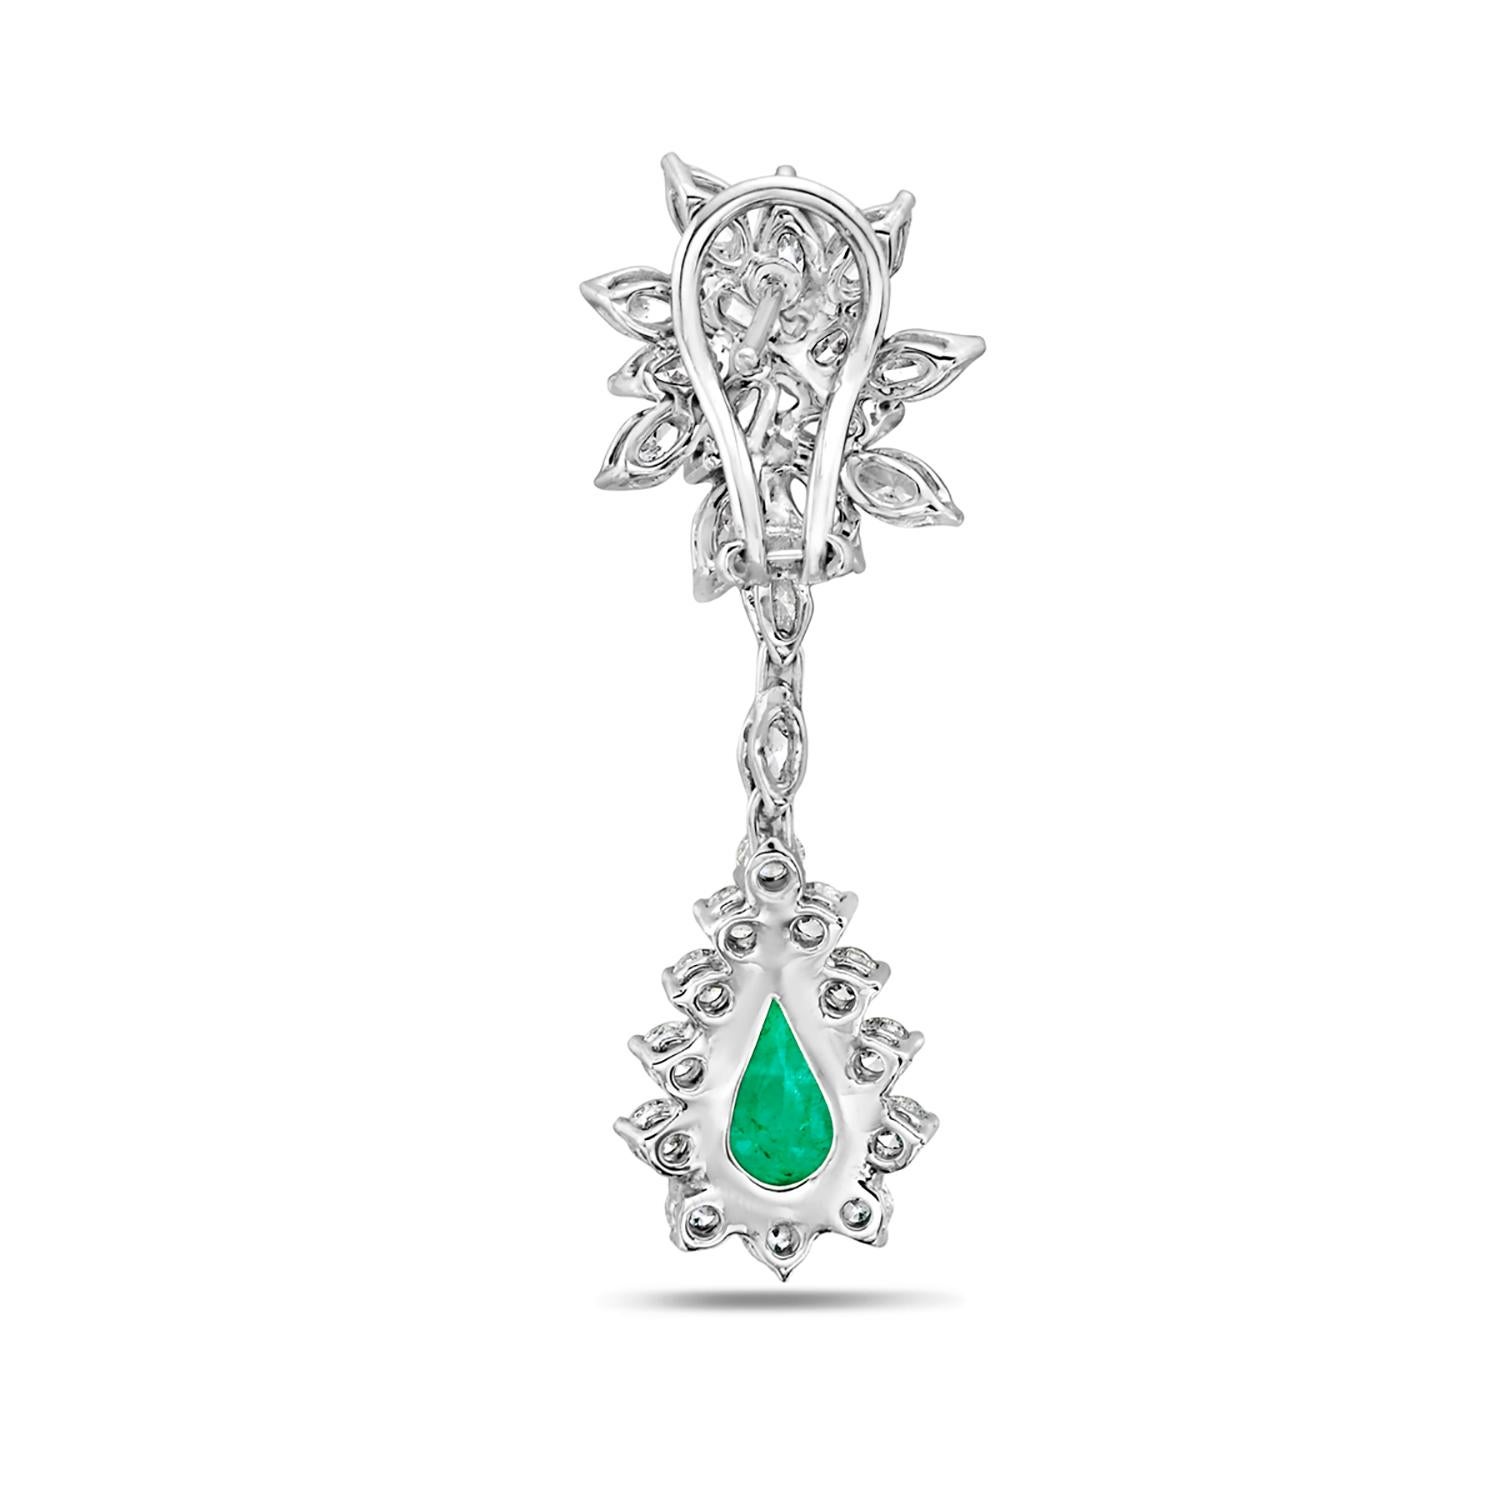 Mixed Cut Starburst Earrings with Pear Shaped Emerald & VS Diamonds in 18k White Gold For Sale